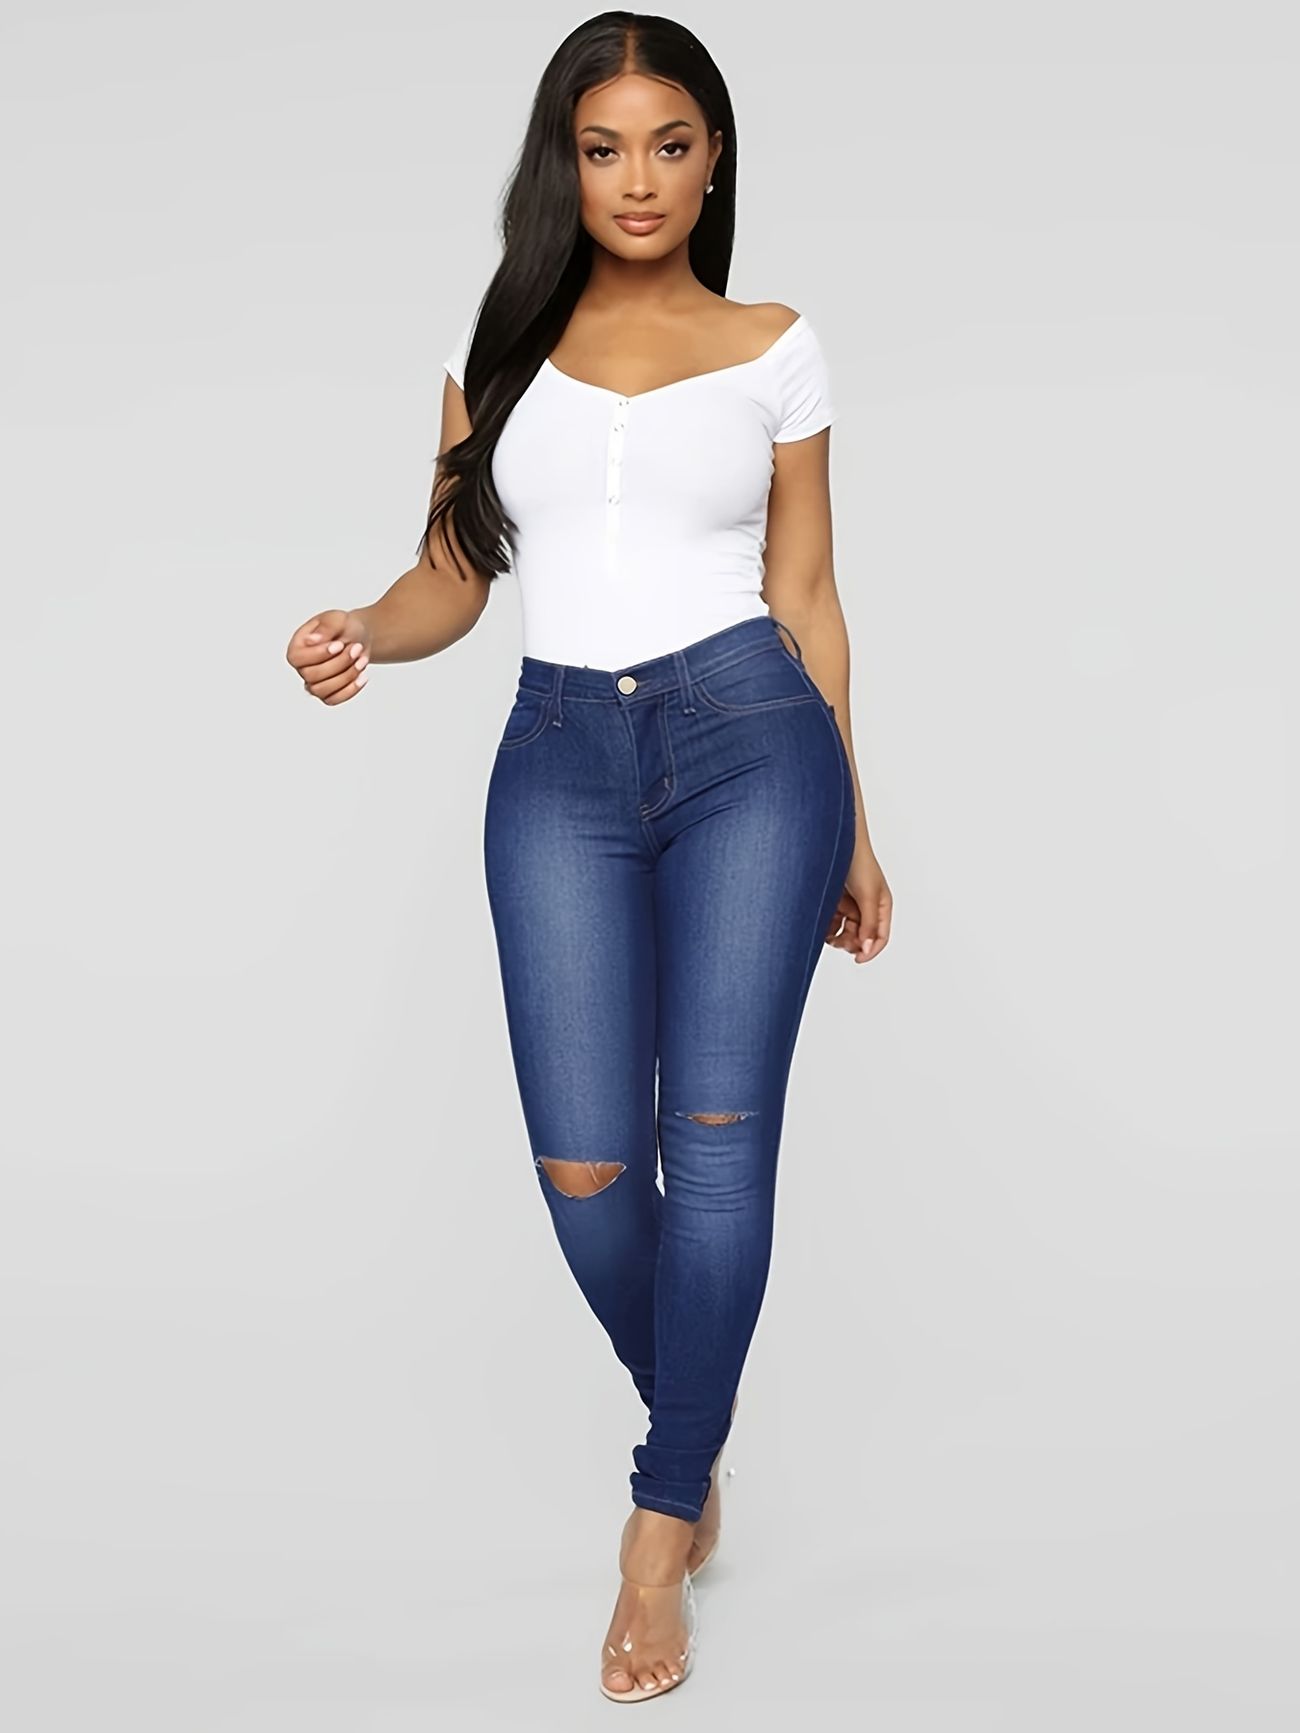 High Waist Solid Denim Jeans, Stretchy Length Women's Clothing Skinny Jeans - Temu